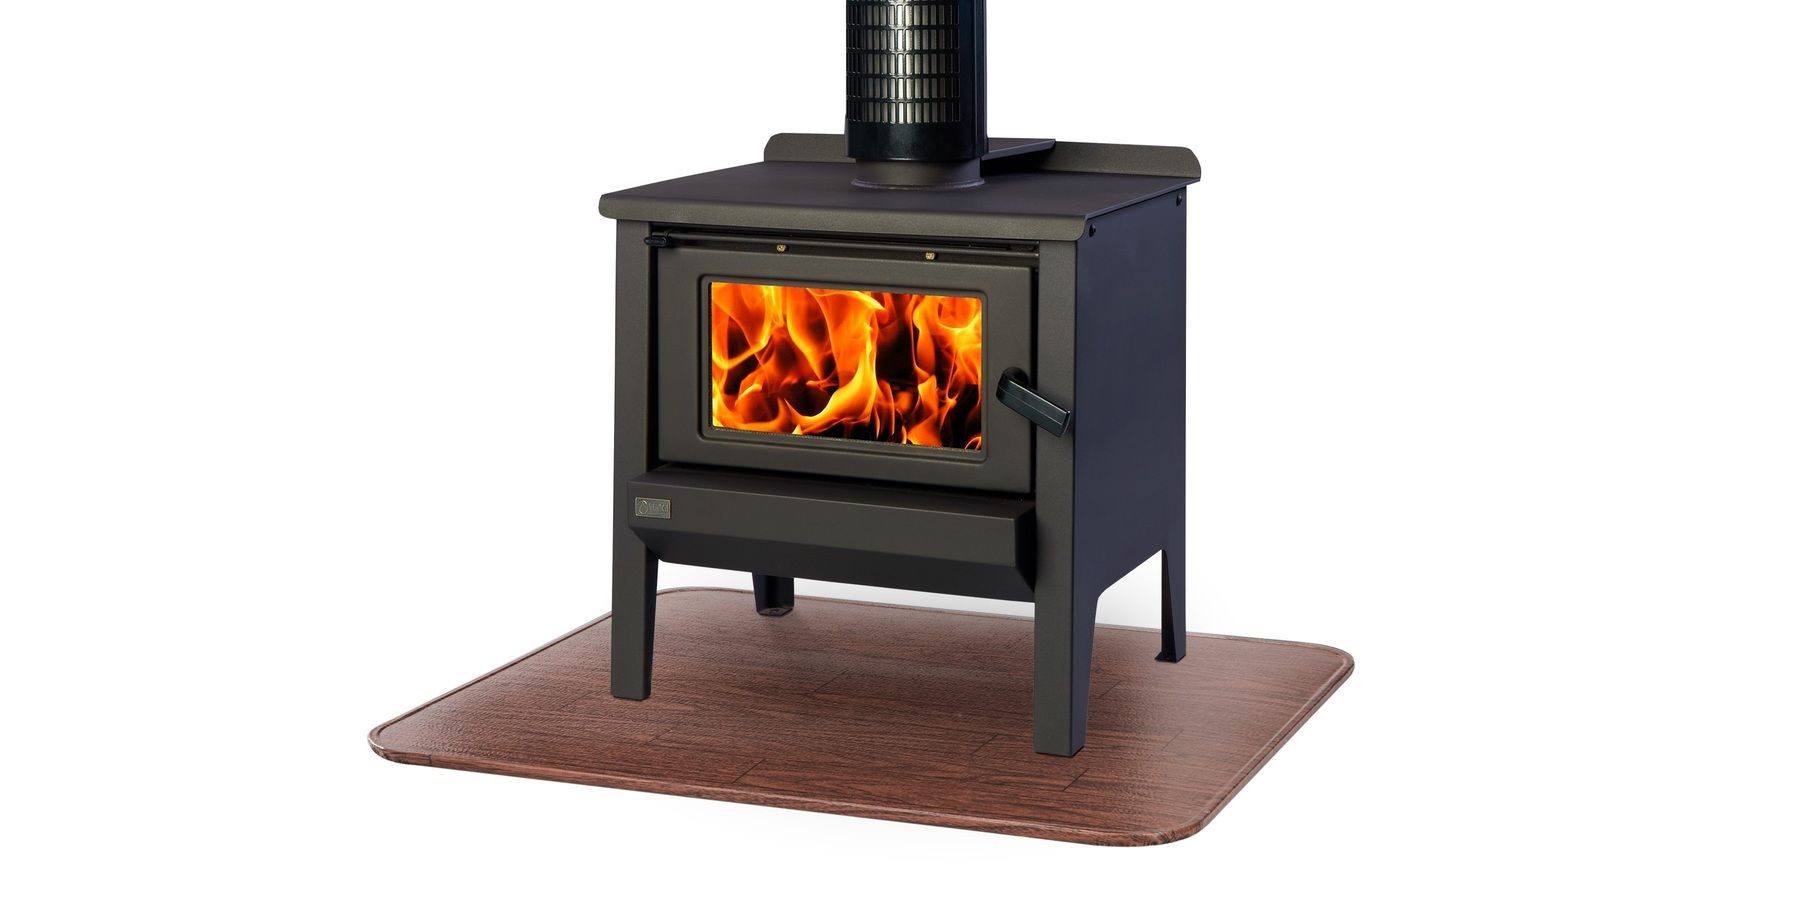 A wood stove with a roaring fire in its firebox resting on a woodgrain type 2 stove board.